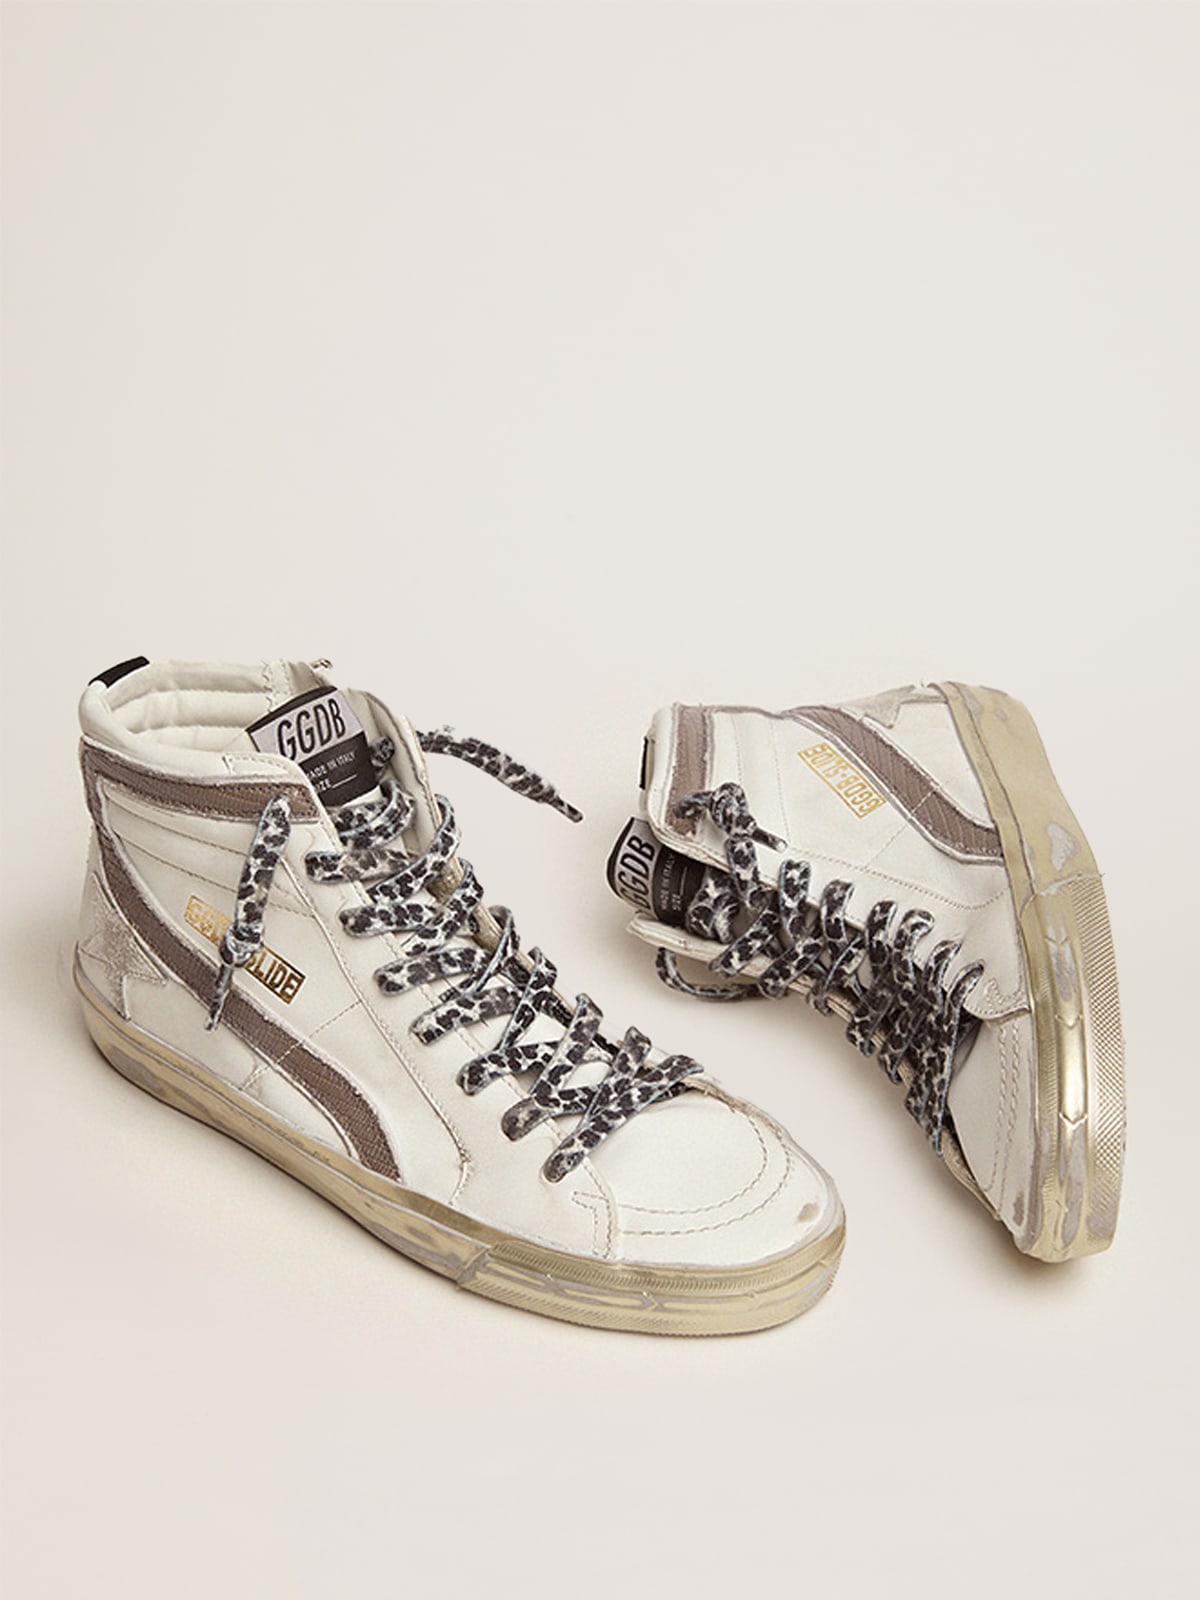 Golden Goose - Slide sneakers with white suede star and dove-gray lizard-print leather flash in 